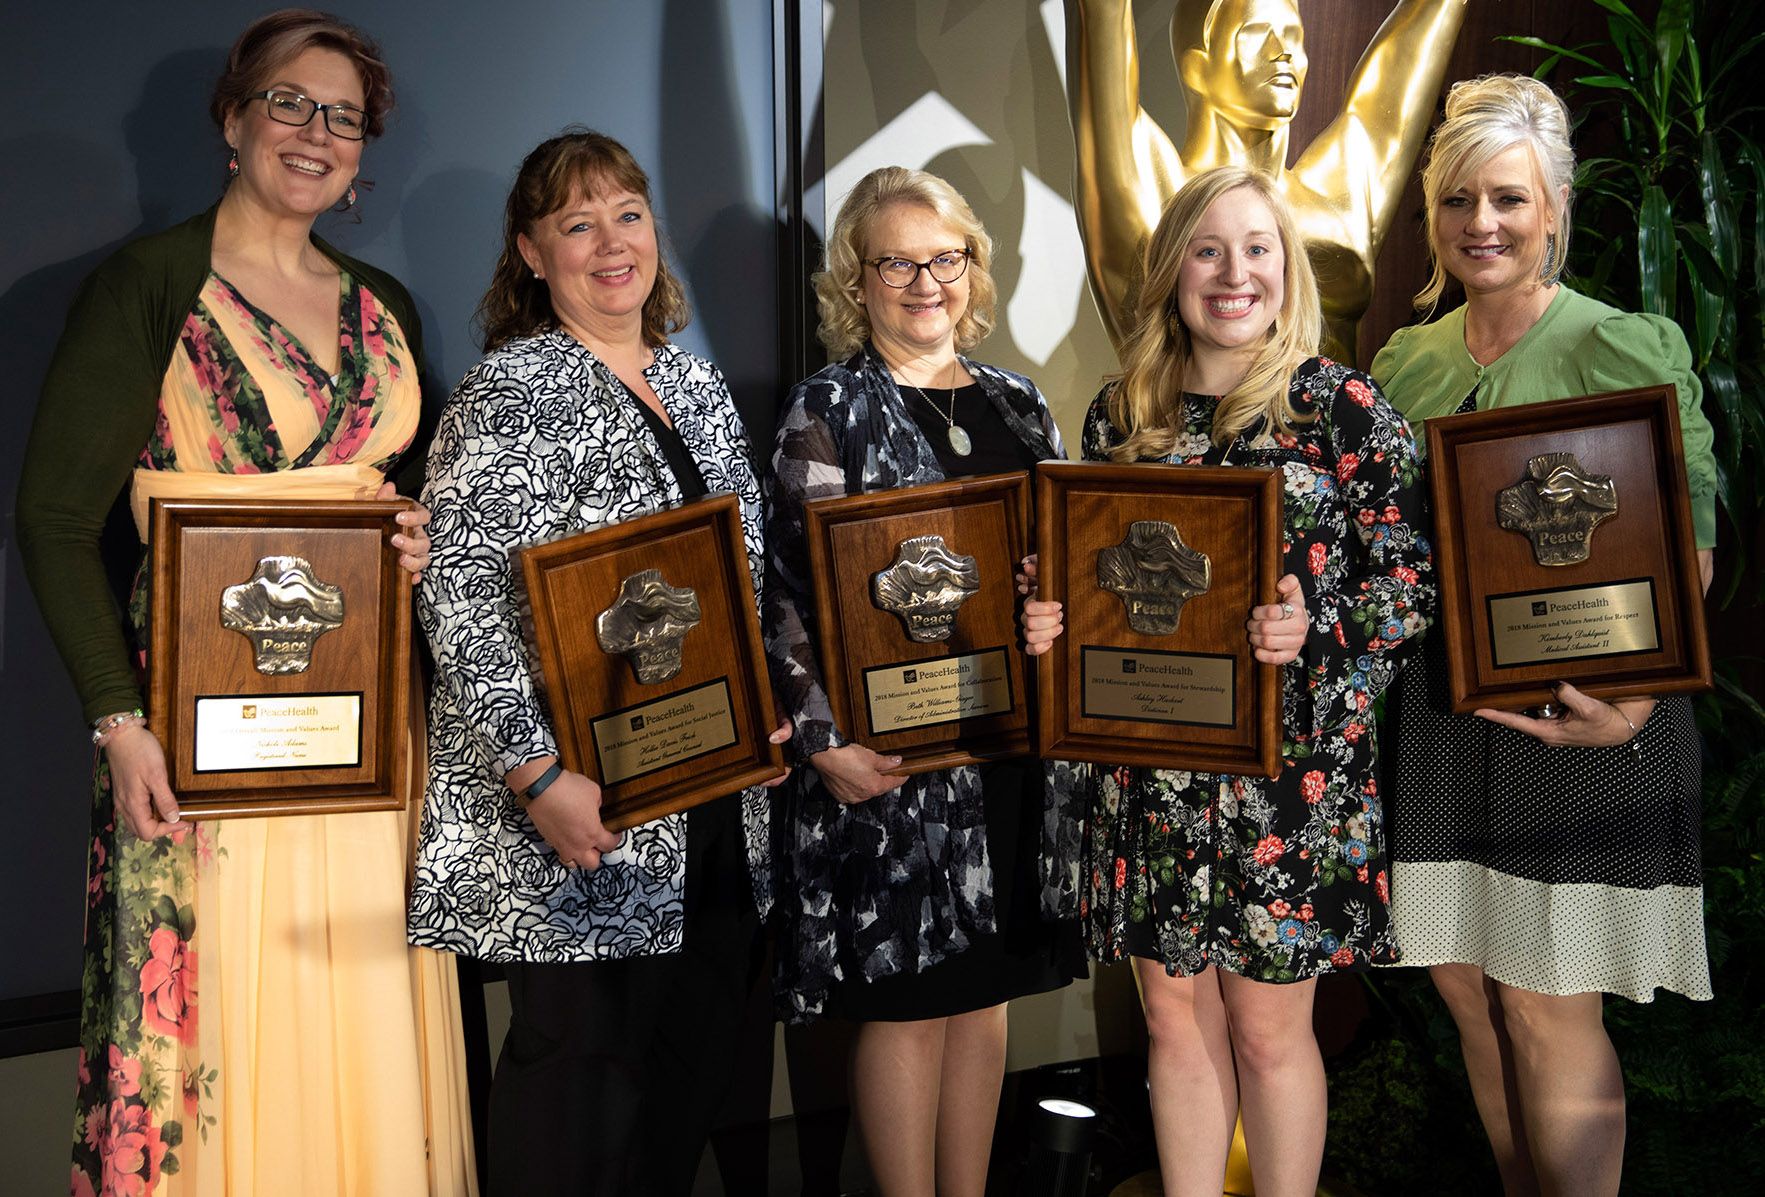 A group of five women hold award plaques